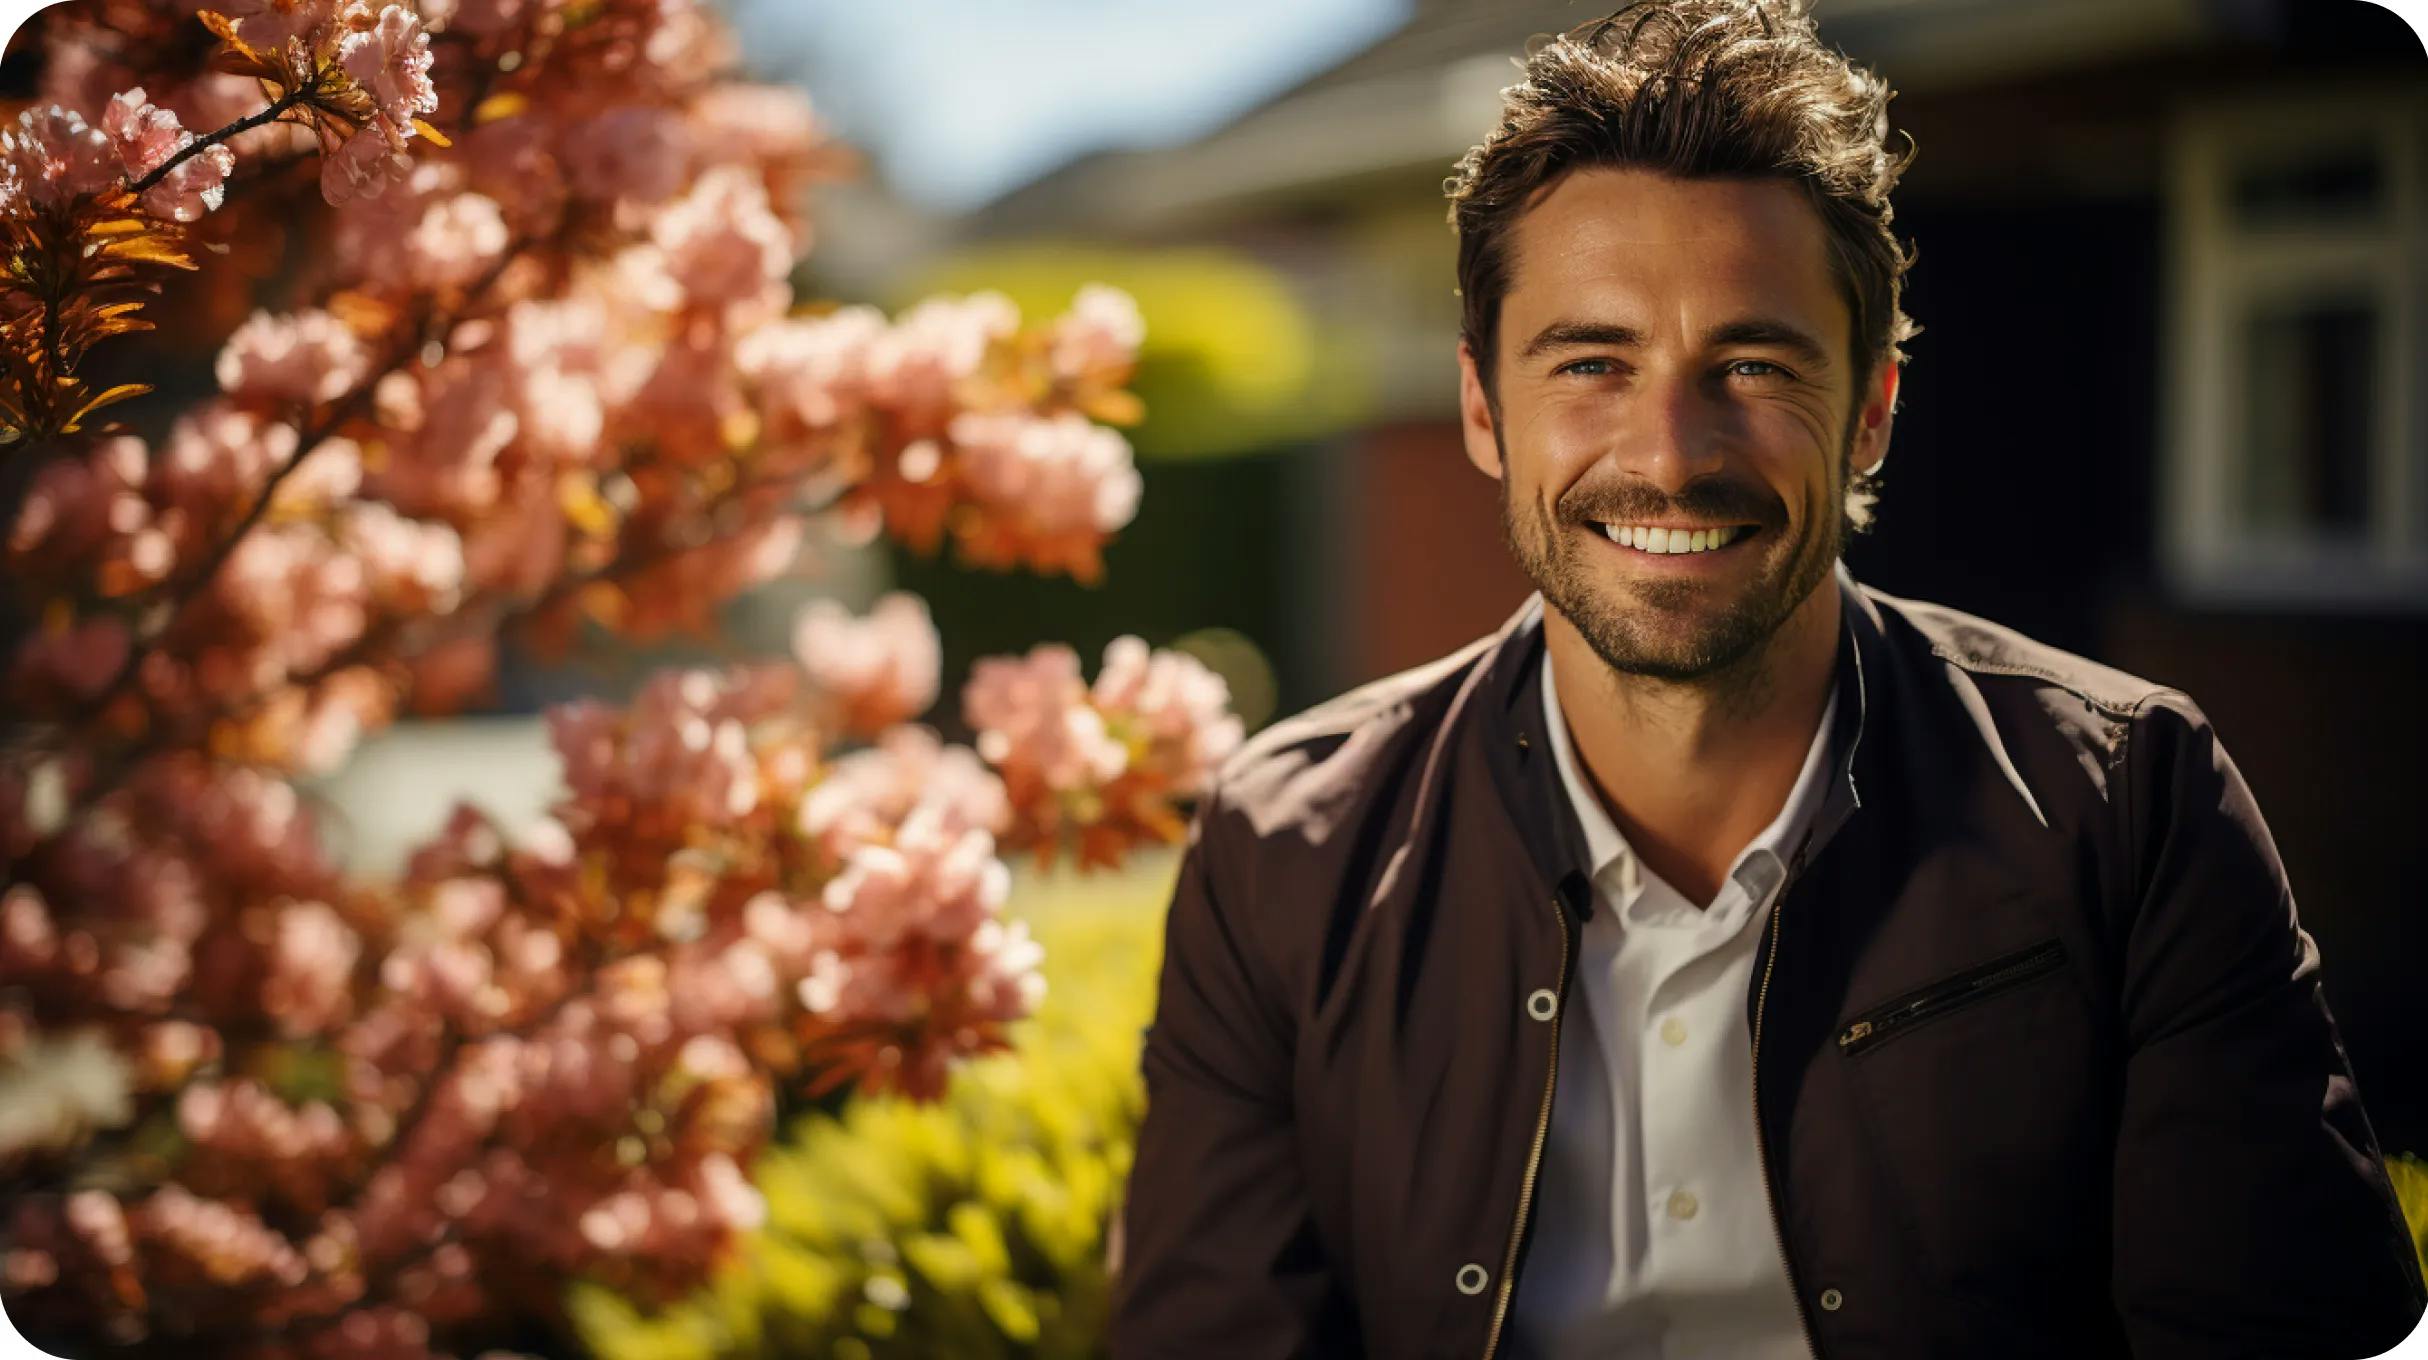 A smiling man standing in front of a home with beautiful flowers in a background